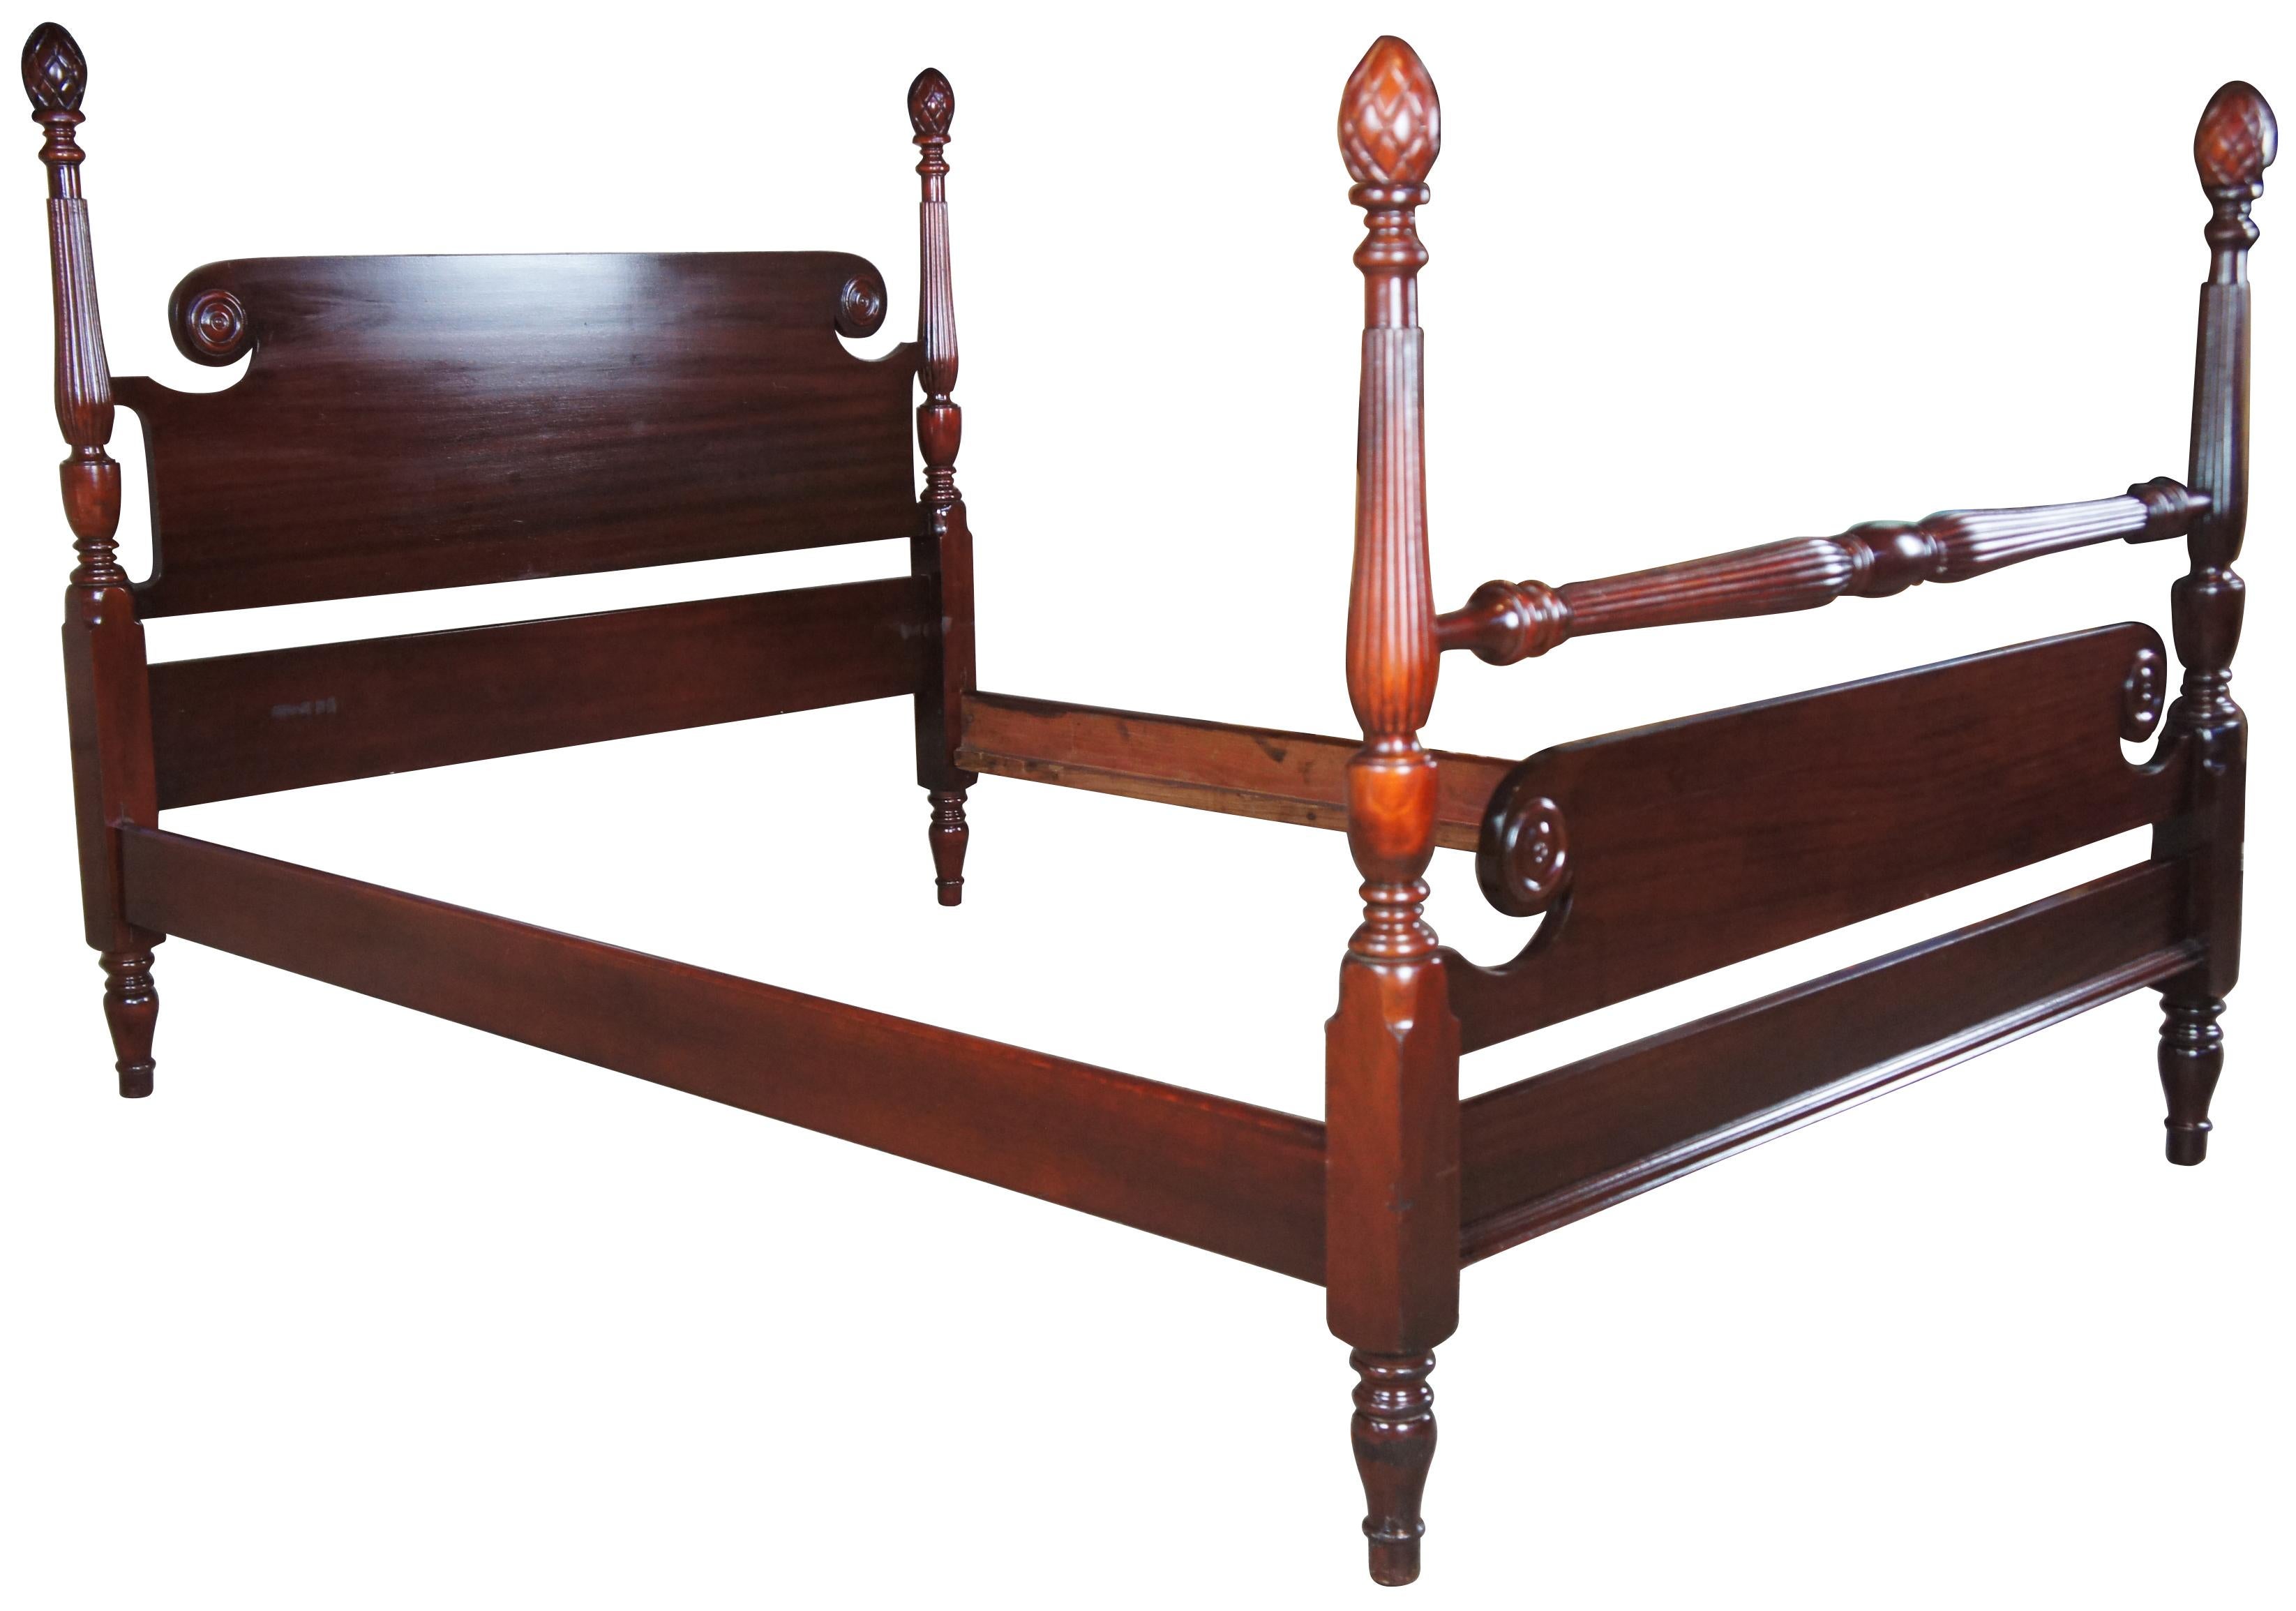 Vintage Georgian style solid mahogany four post full size bed pineapple finials

Mid-20th century American mahogany poster bed. Georgian style with fluted balusters featuring pineapple finials and circular medallions along the foot and headboard.